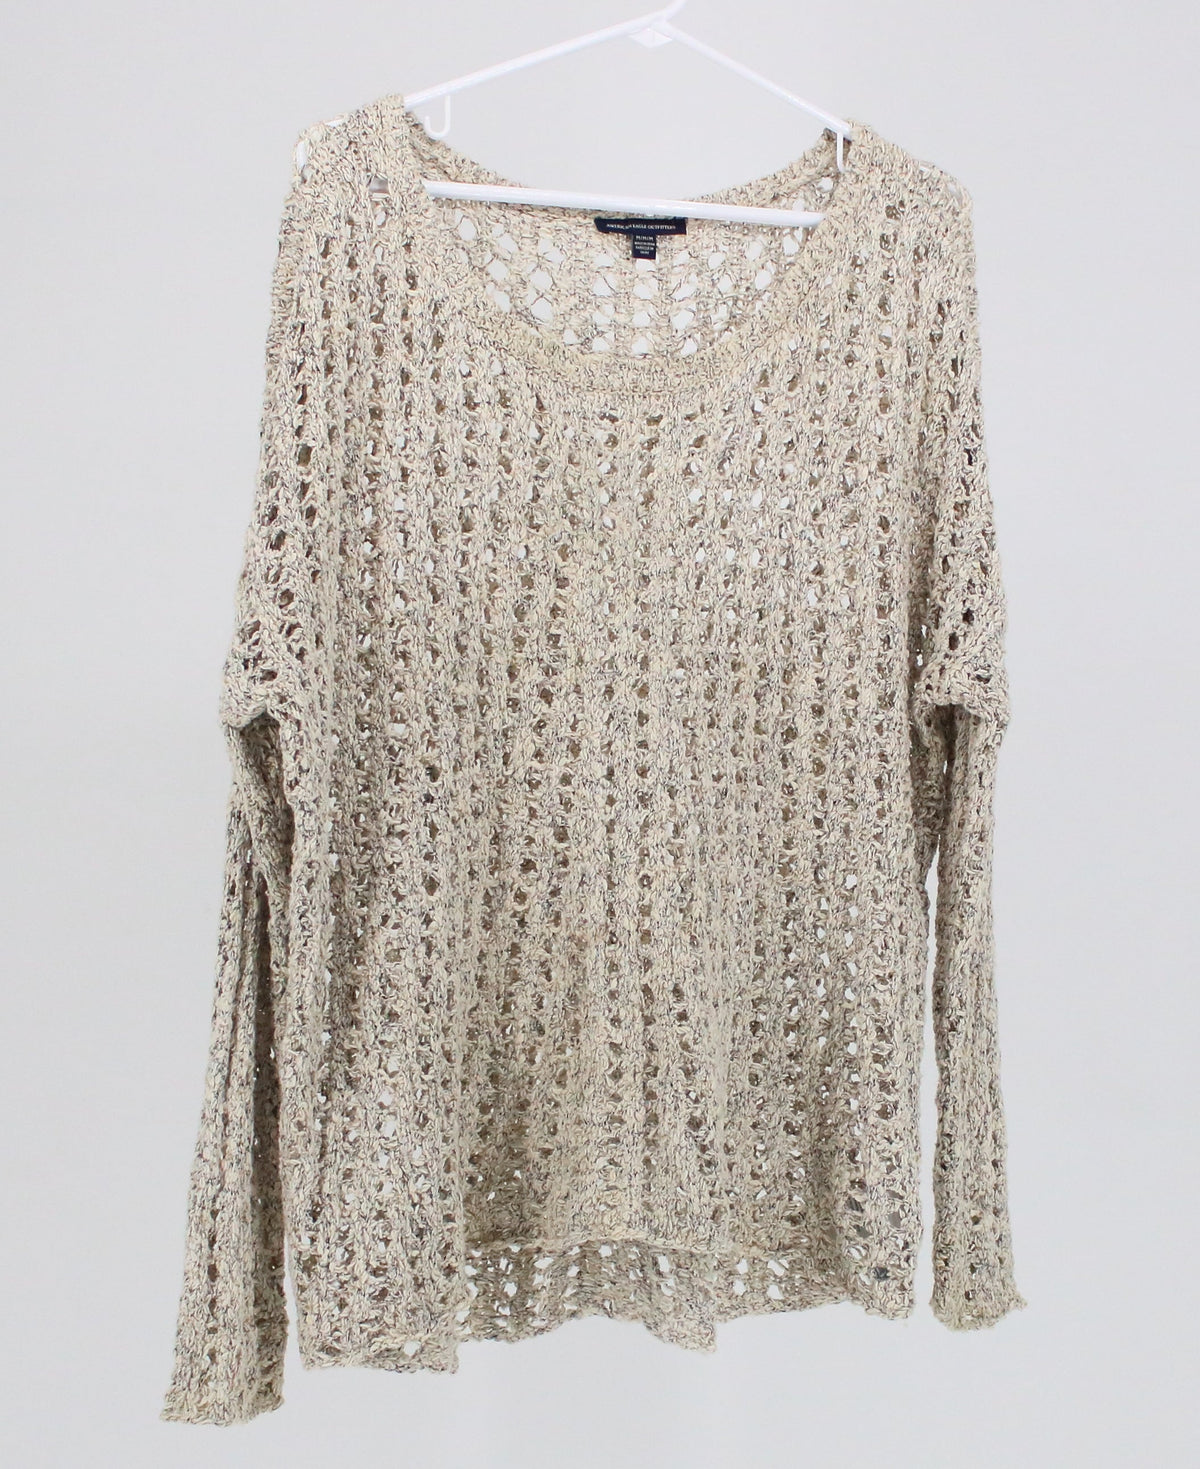 American Eagle Outfitters Crochet Beige Sweater